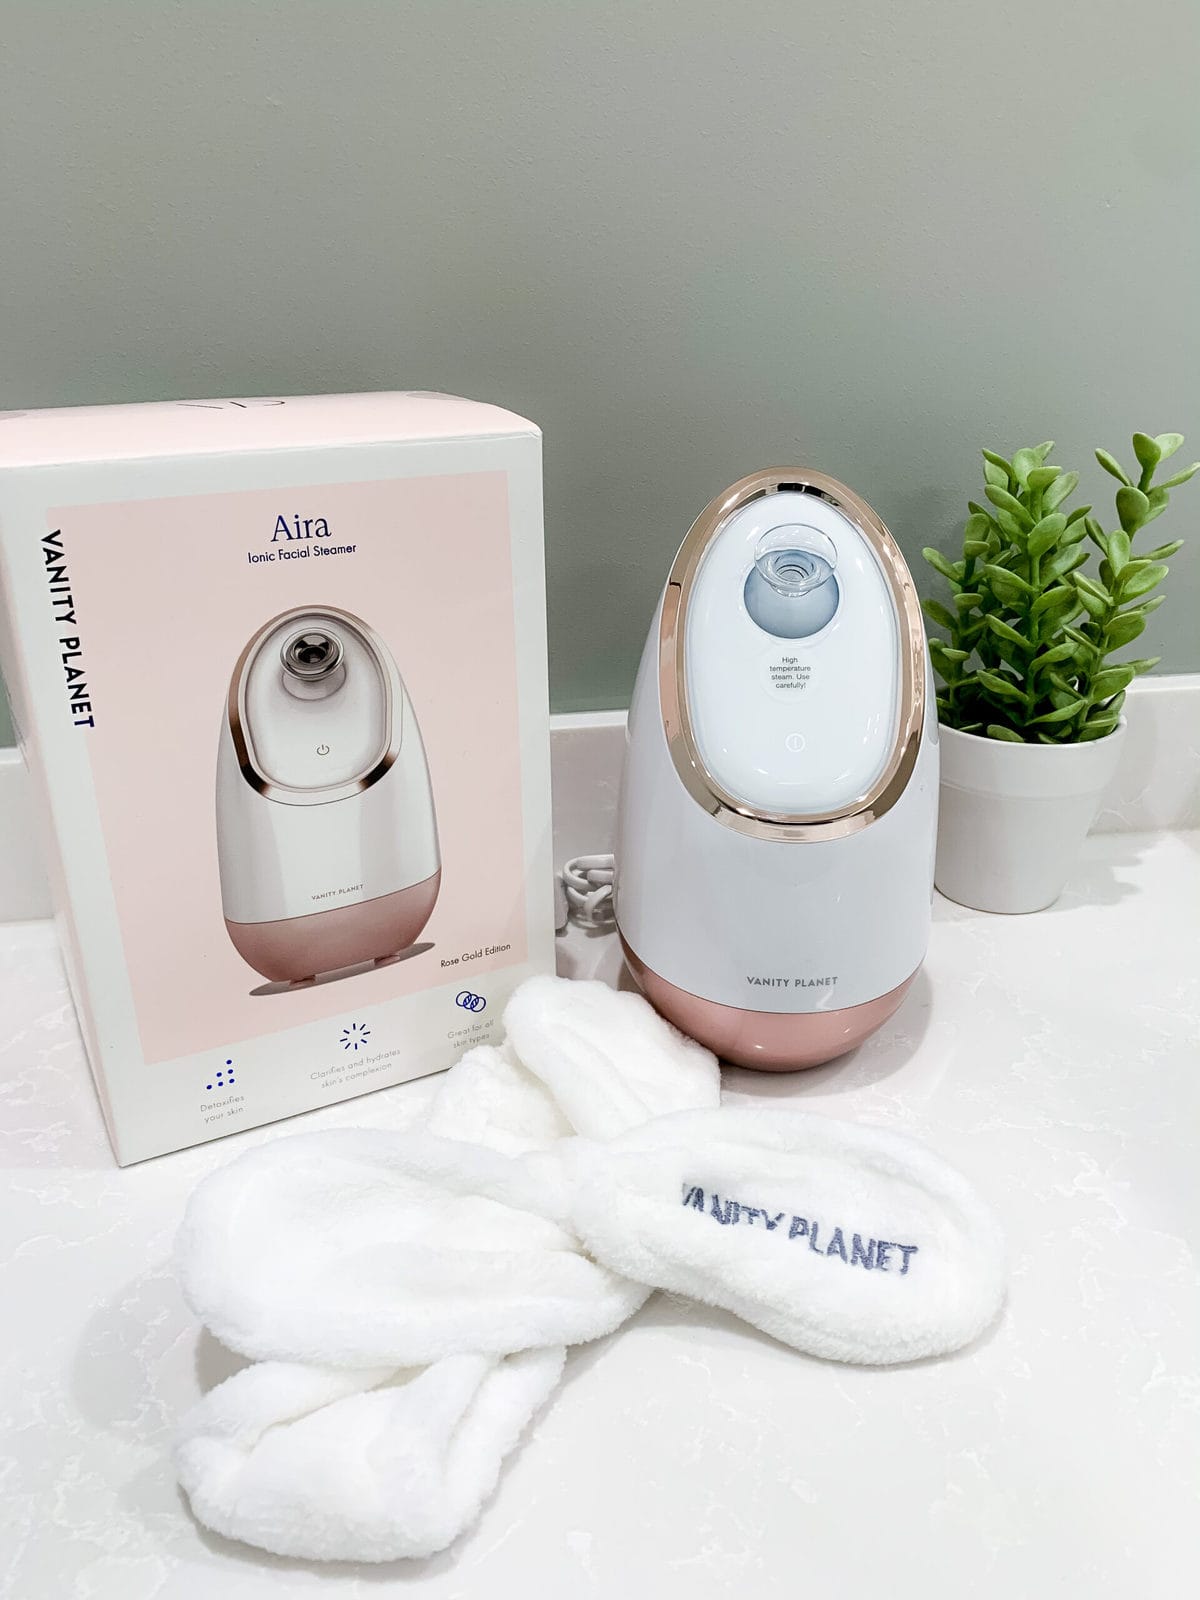 White and rose gold Vanity Planet Aria face steamer